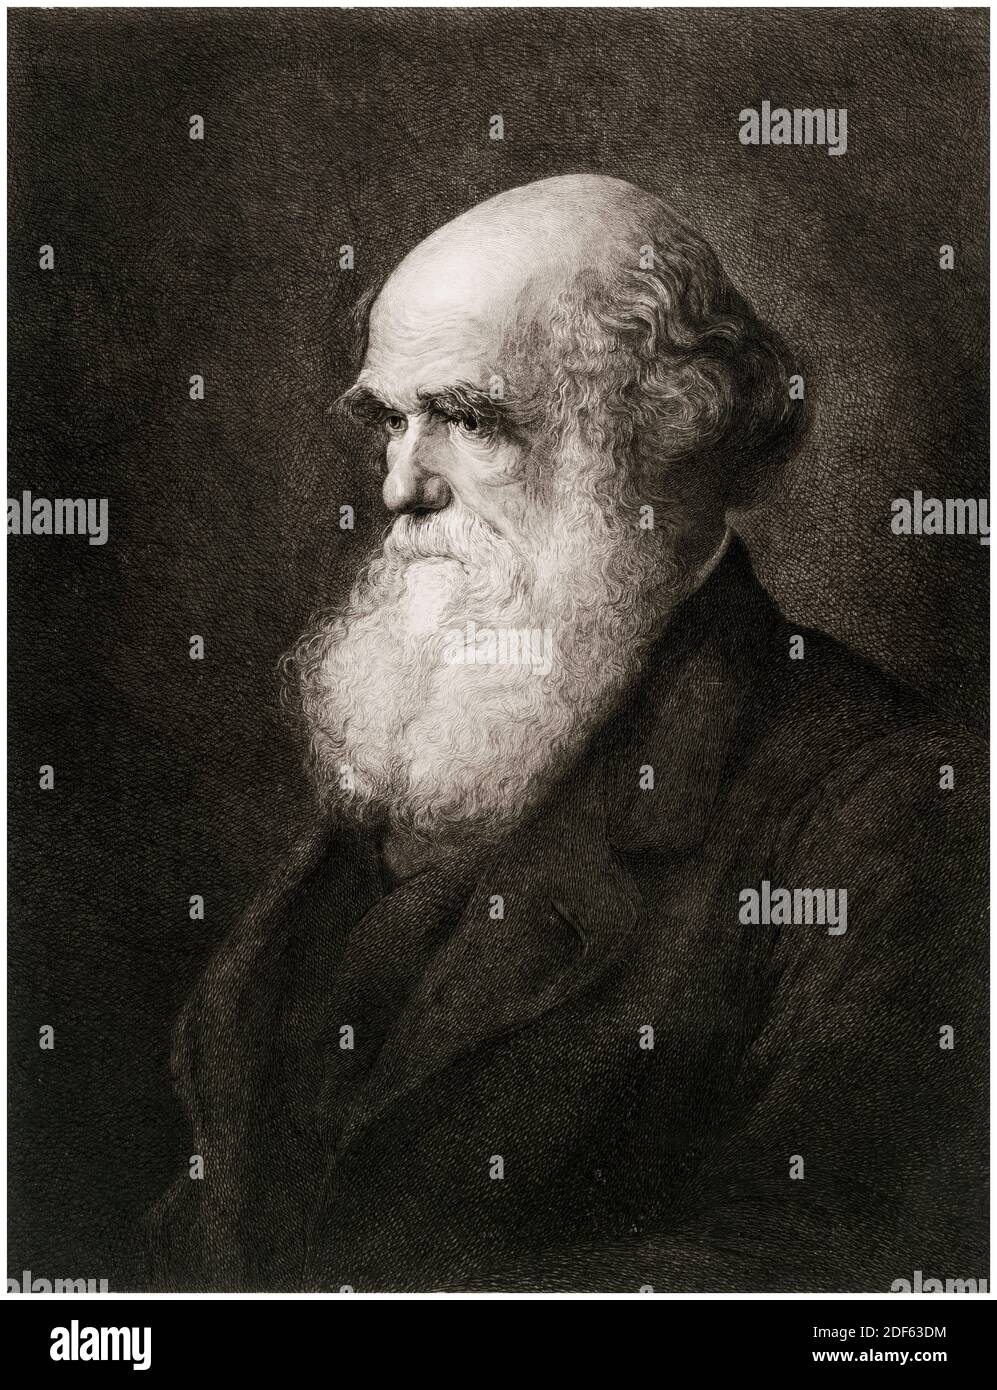 Charles Darwin (1809-1882), English naturalist, geologist and biologist, portrait engraving by G Mercier after WW Ouless, circa 1890 Stock Photo